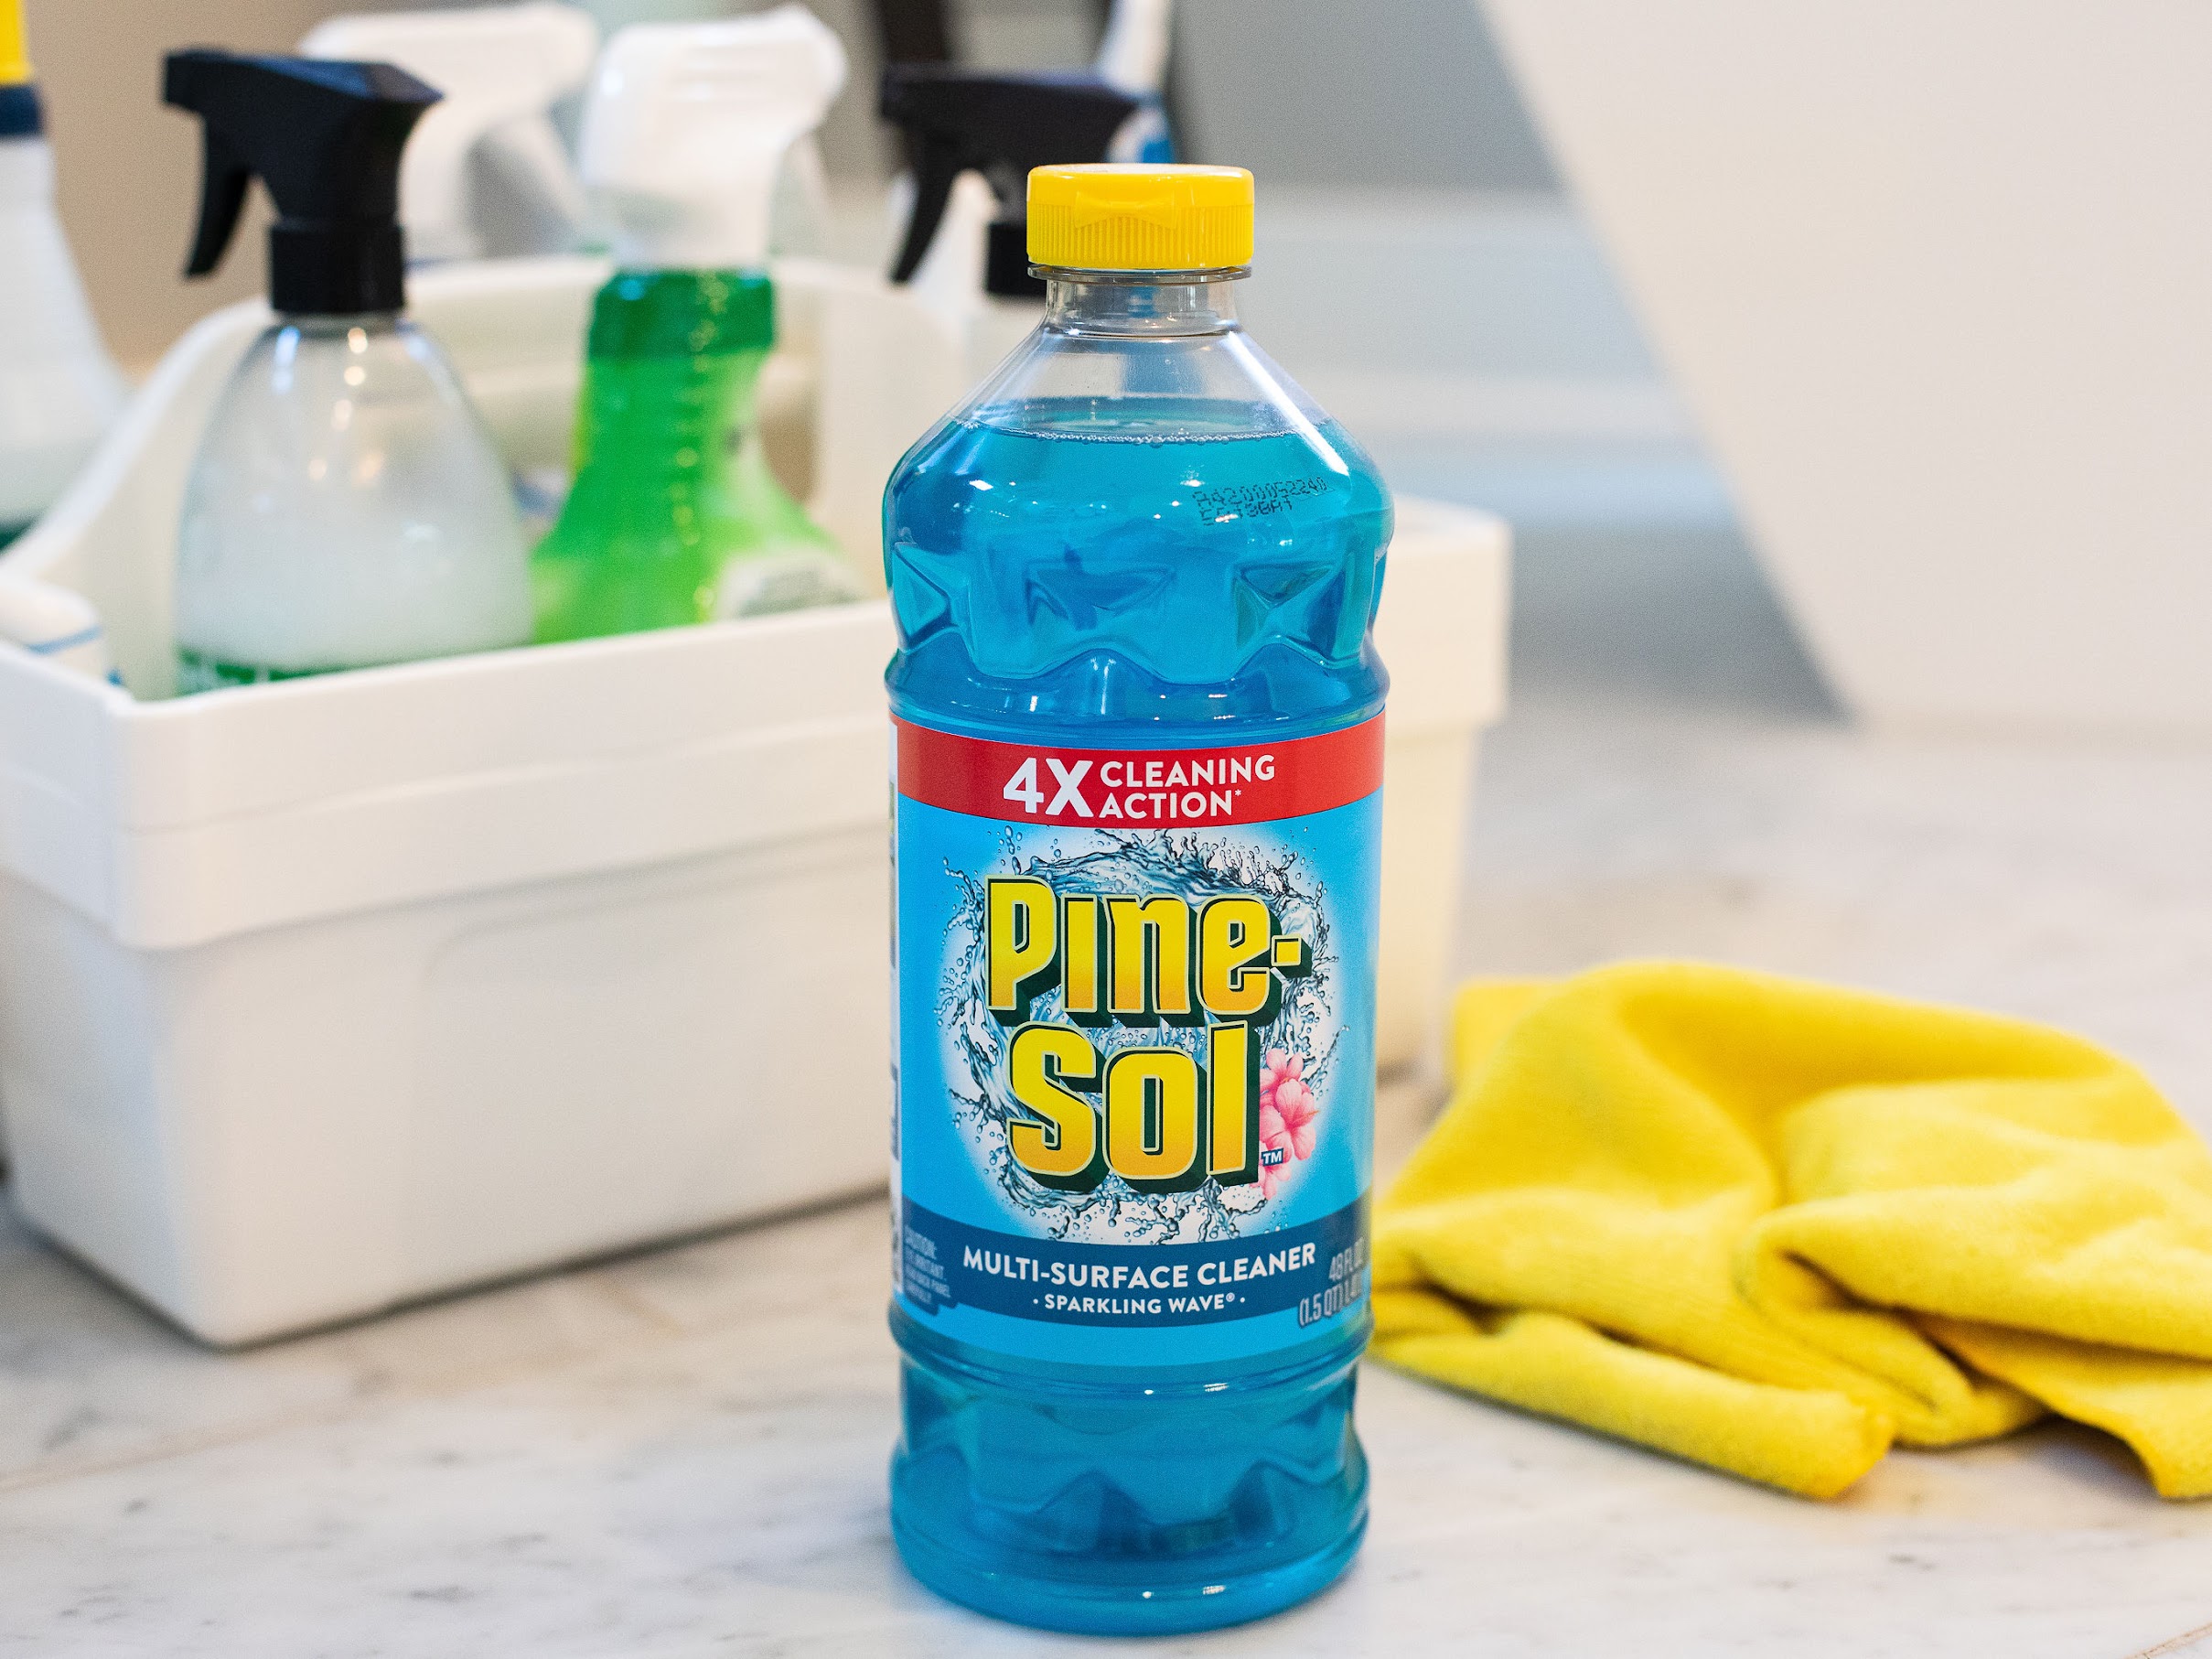 Big Bottles Of Pine-Sol Multi-Surface Cleaner Only $1.95 At Publix